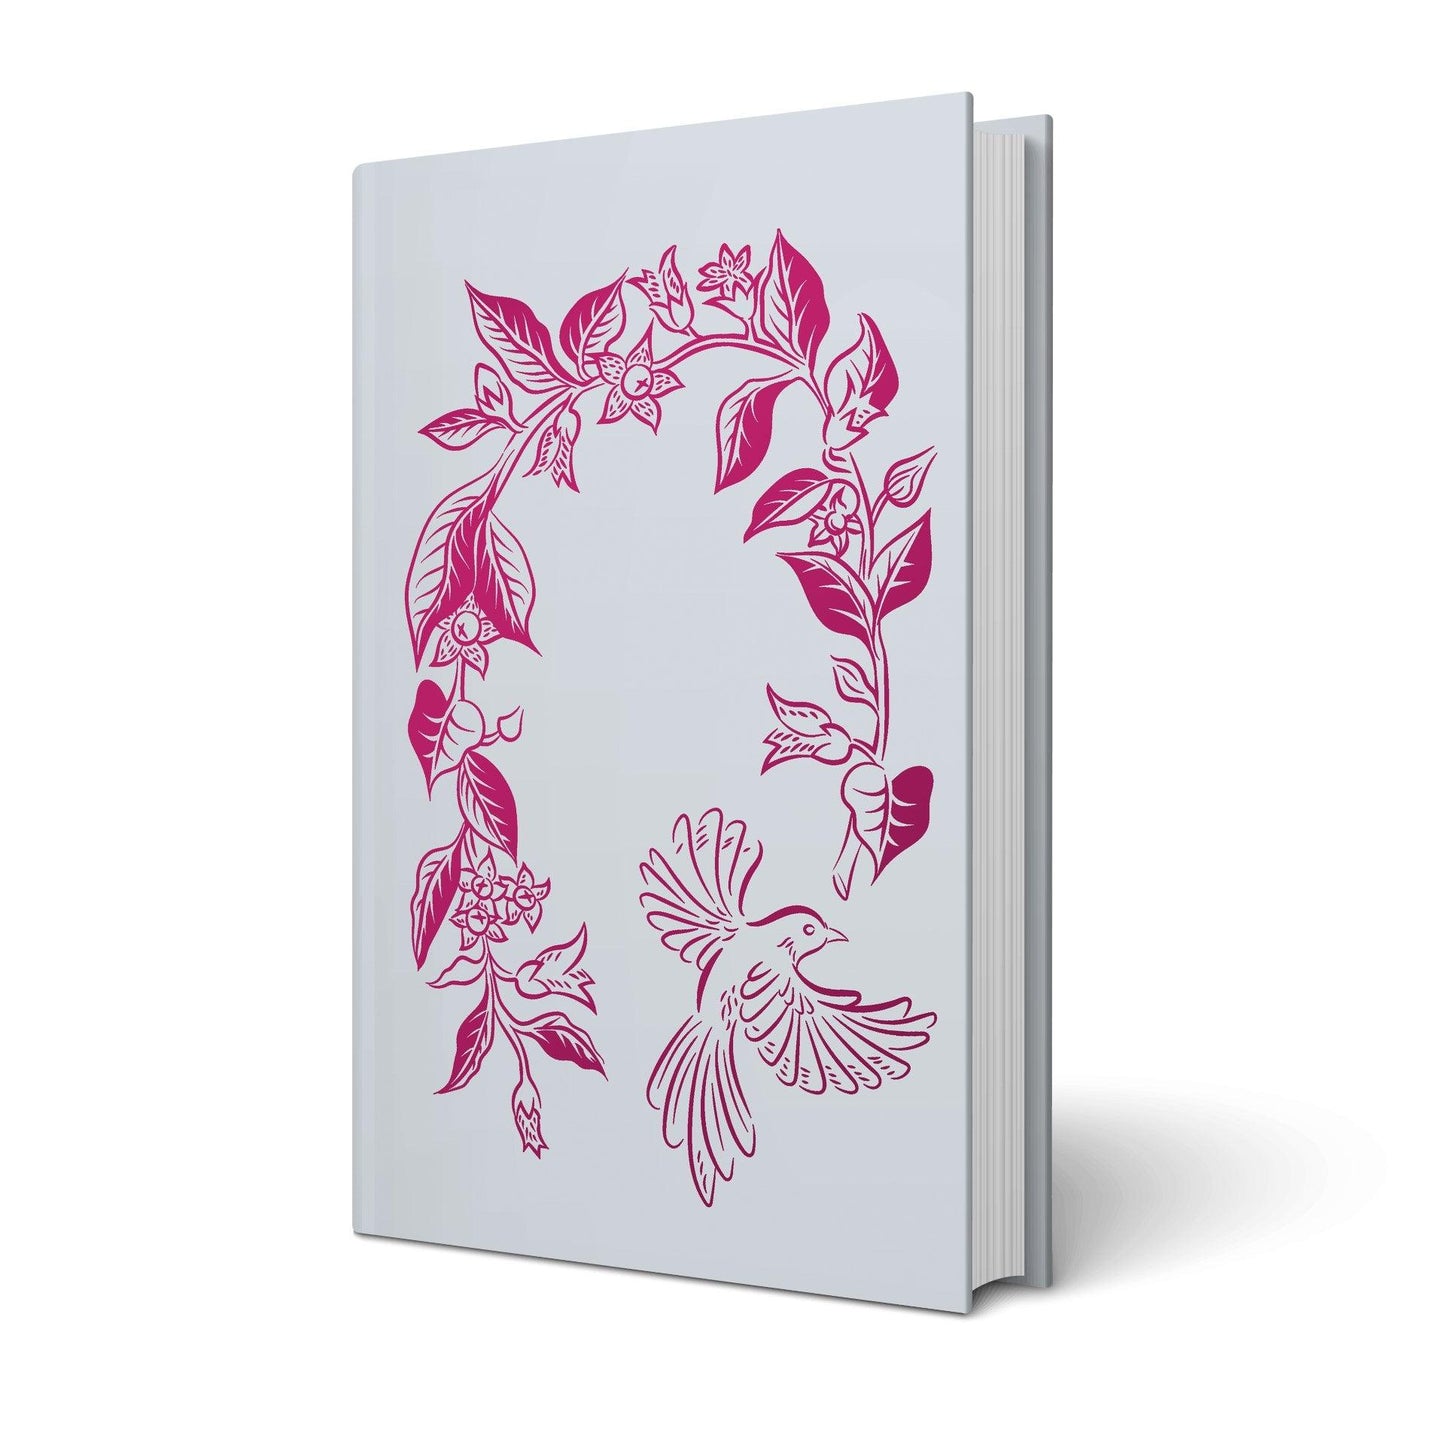 'Belladonna' by Adalyn Grace - Vault Edition with Foiled Cover - The Cleeve Bookshop